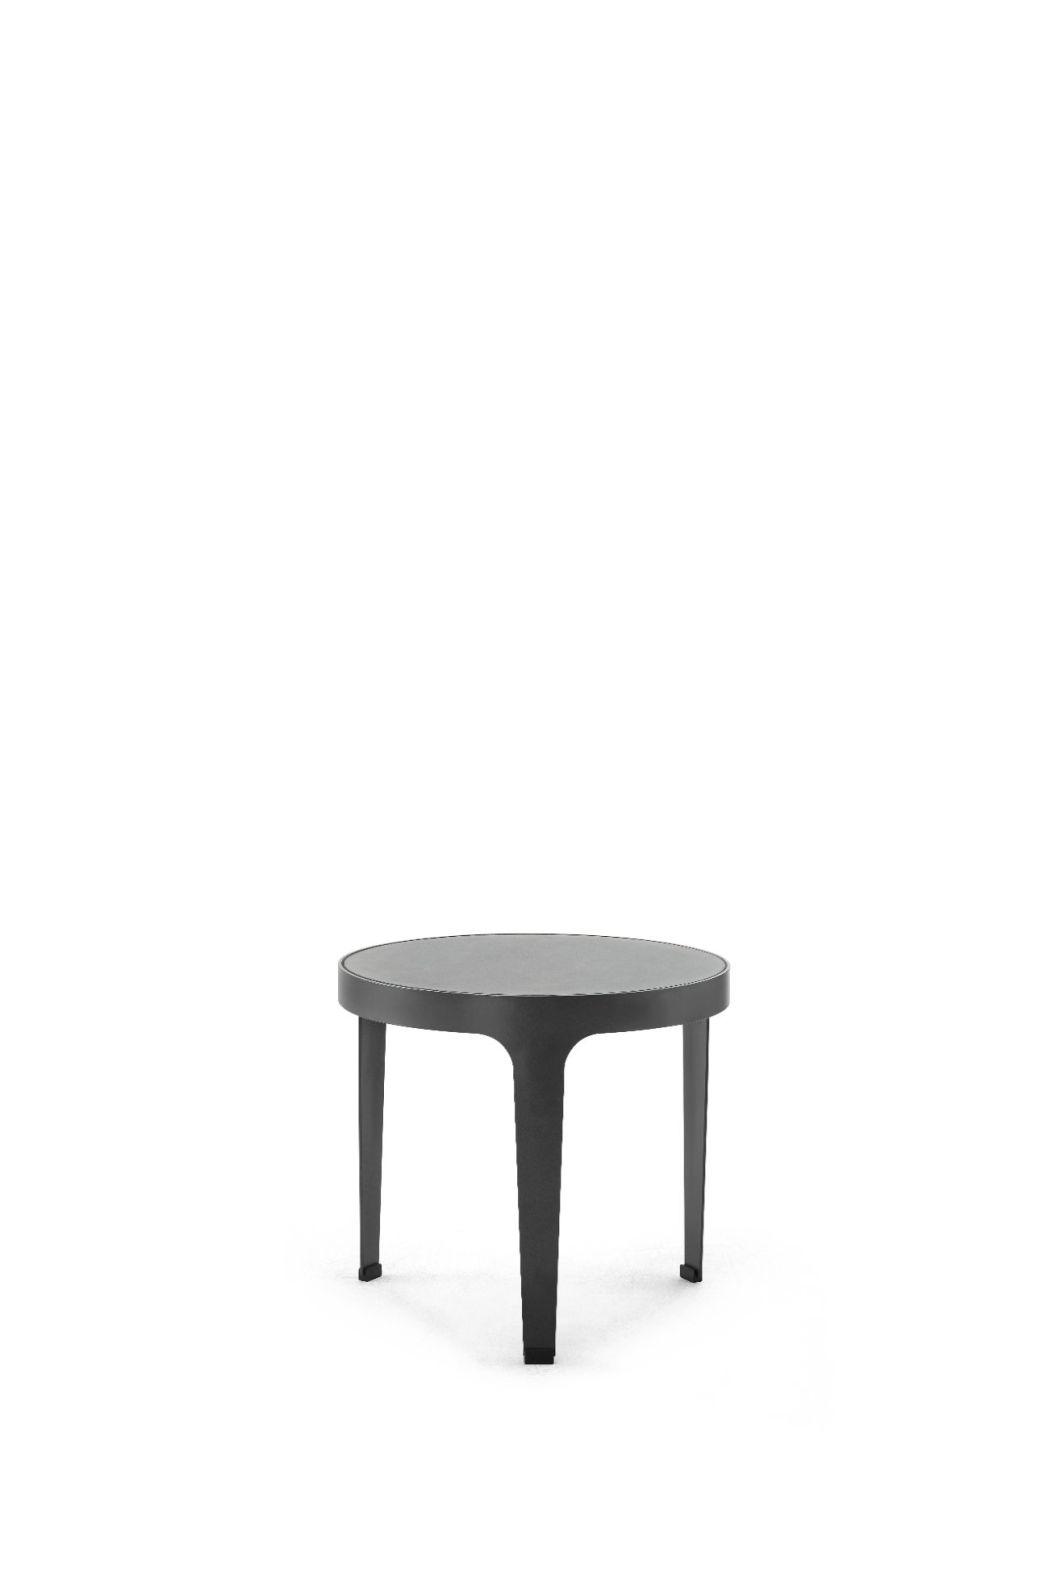 M-Cj003b Coffee Table, Modern Deign in Home and Hotel Furniture